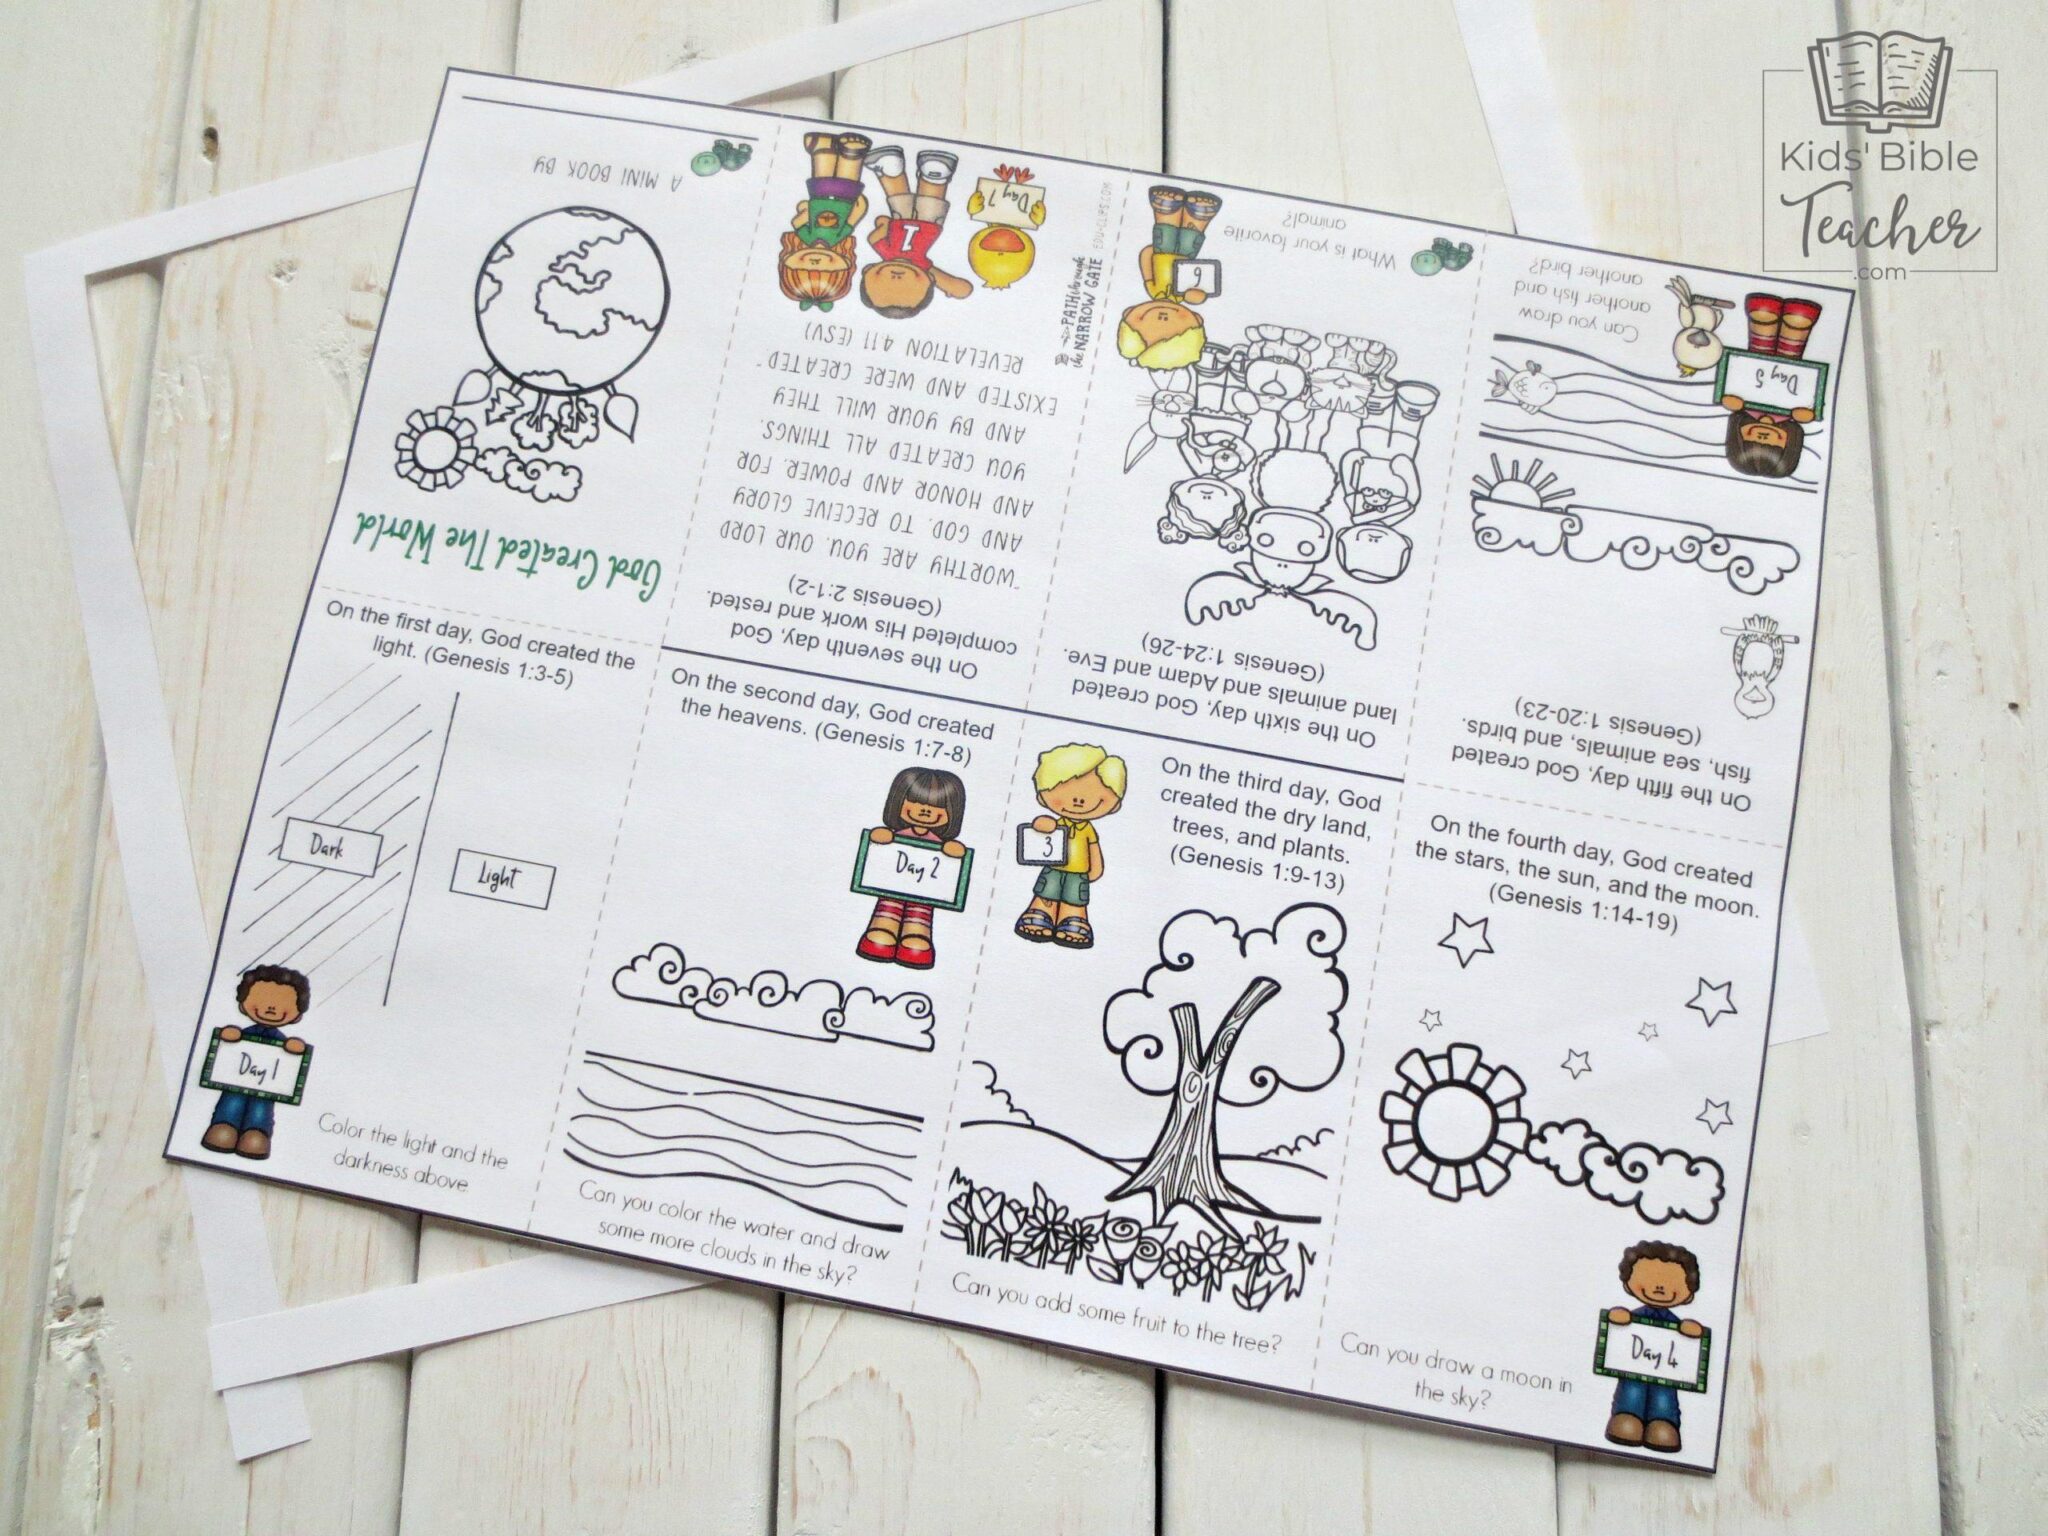 This creation printable mini book is a perfect way to teach kids the story of God creating the world - great for home or classroom use!